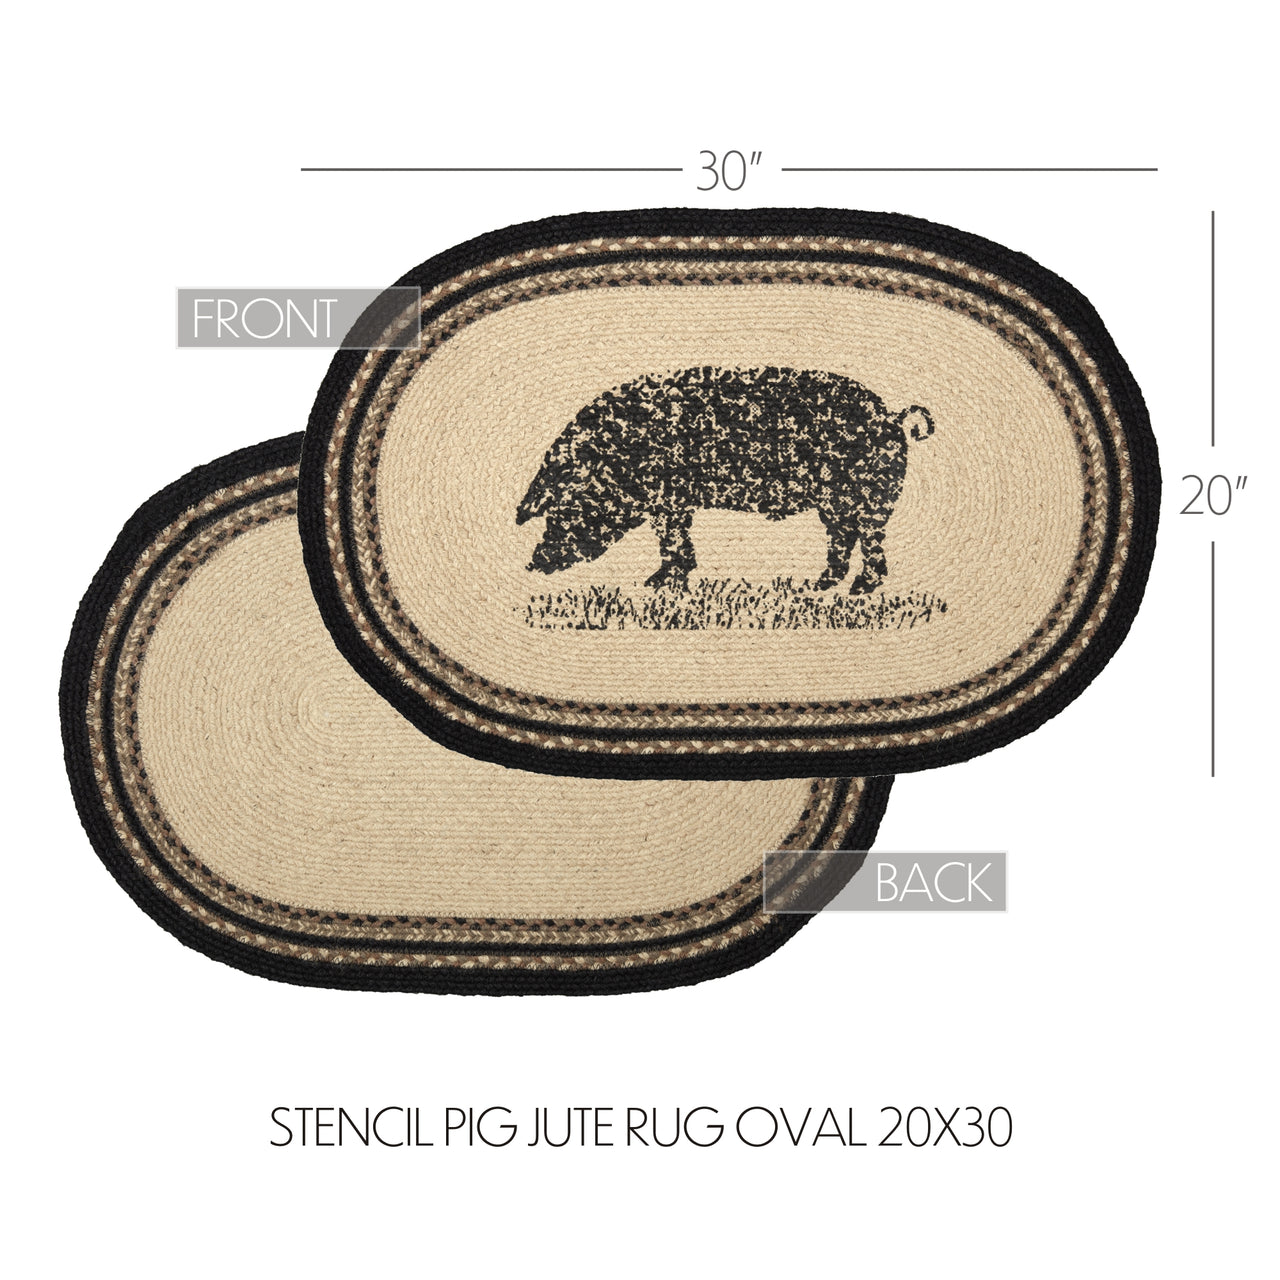 Sawyer Mill Charcoal Pig Jute Braided Rug Oval 20"x30" with Rug Pad VHC Brands